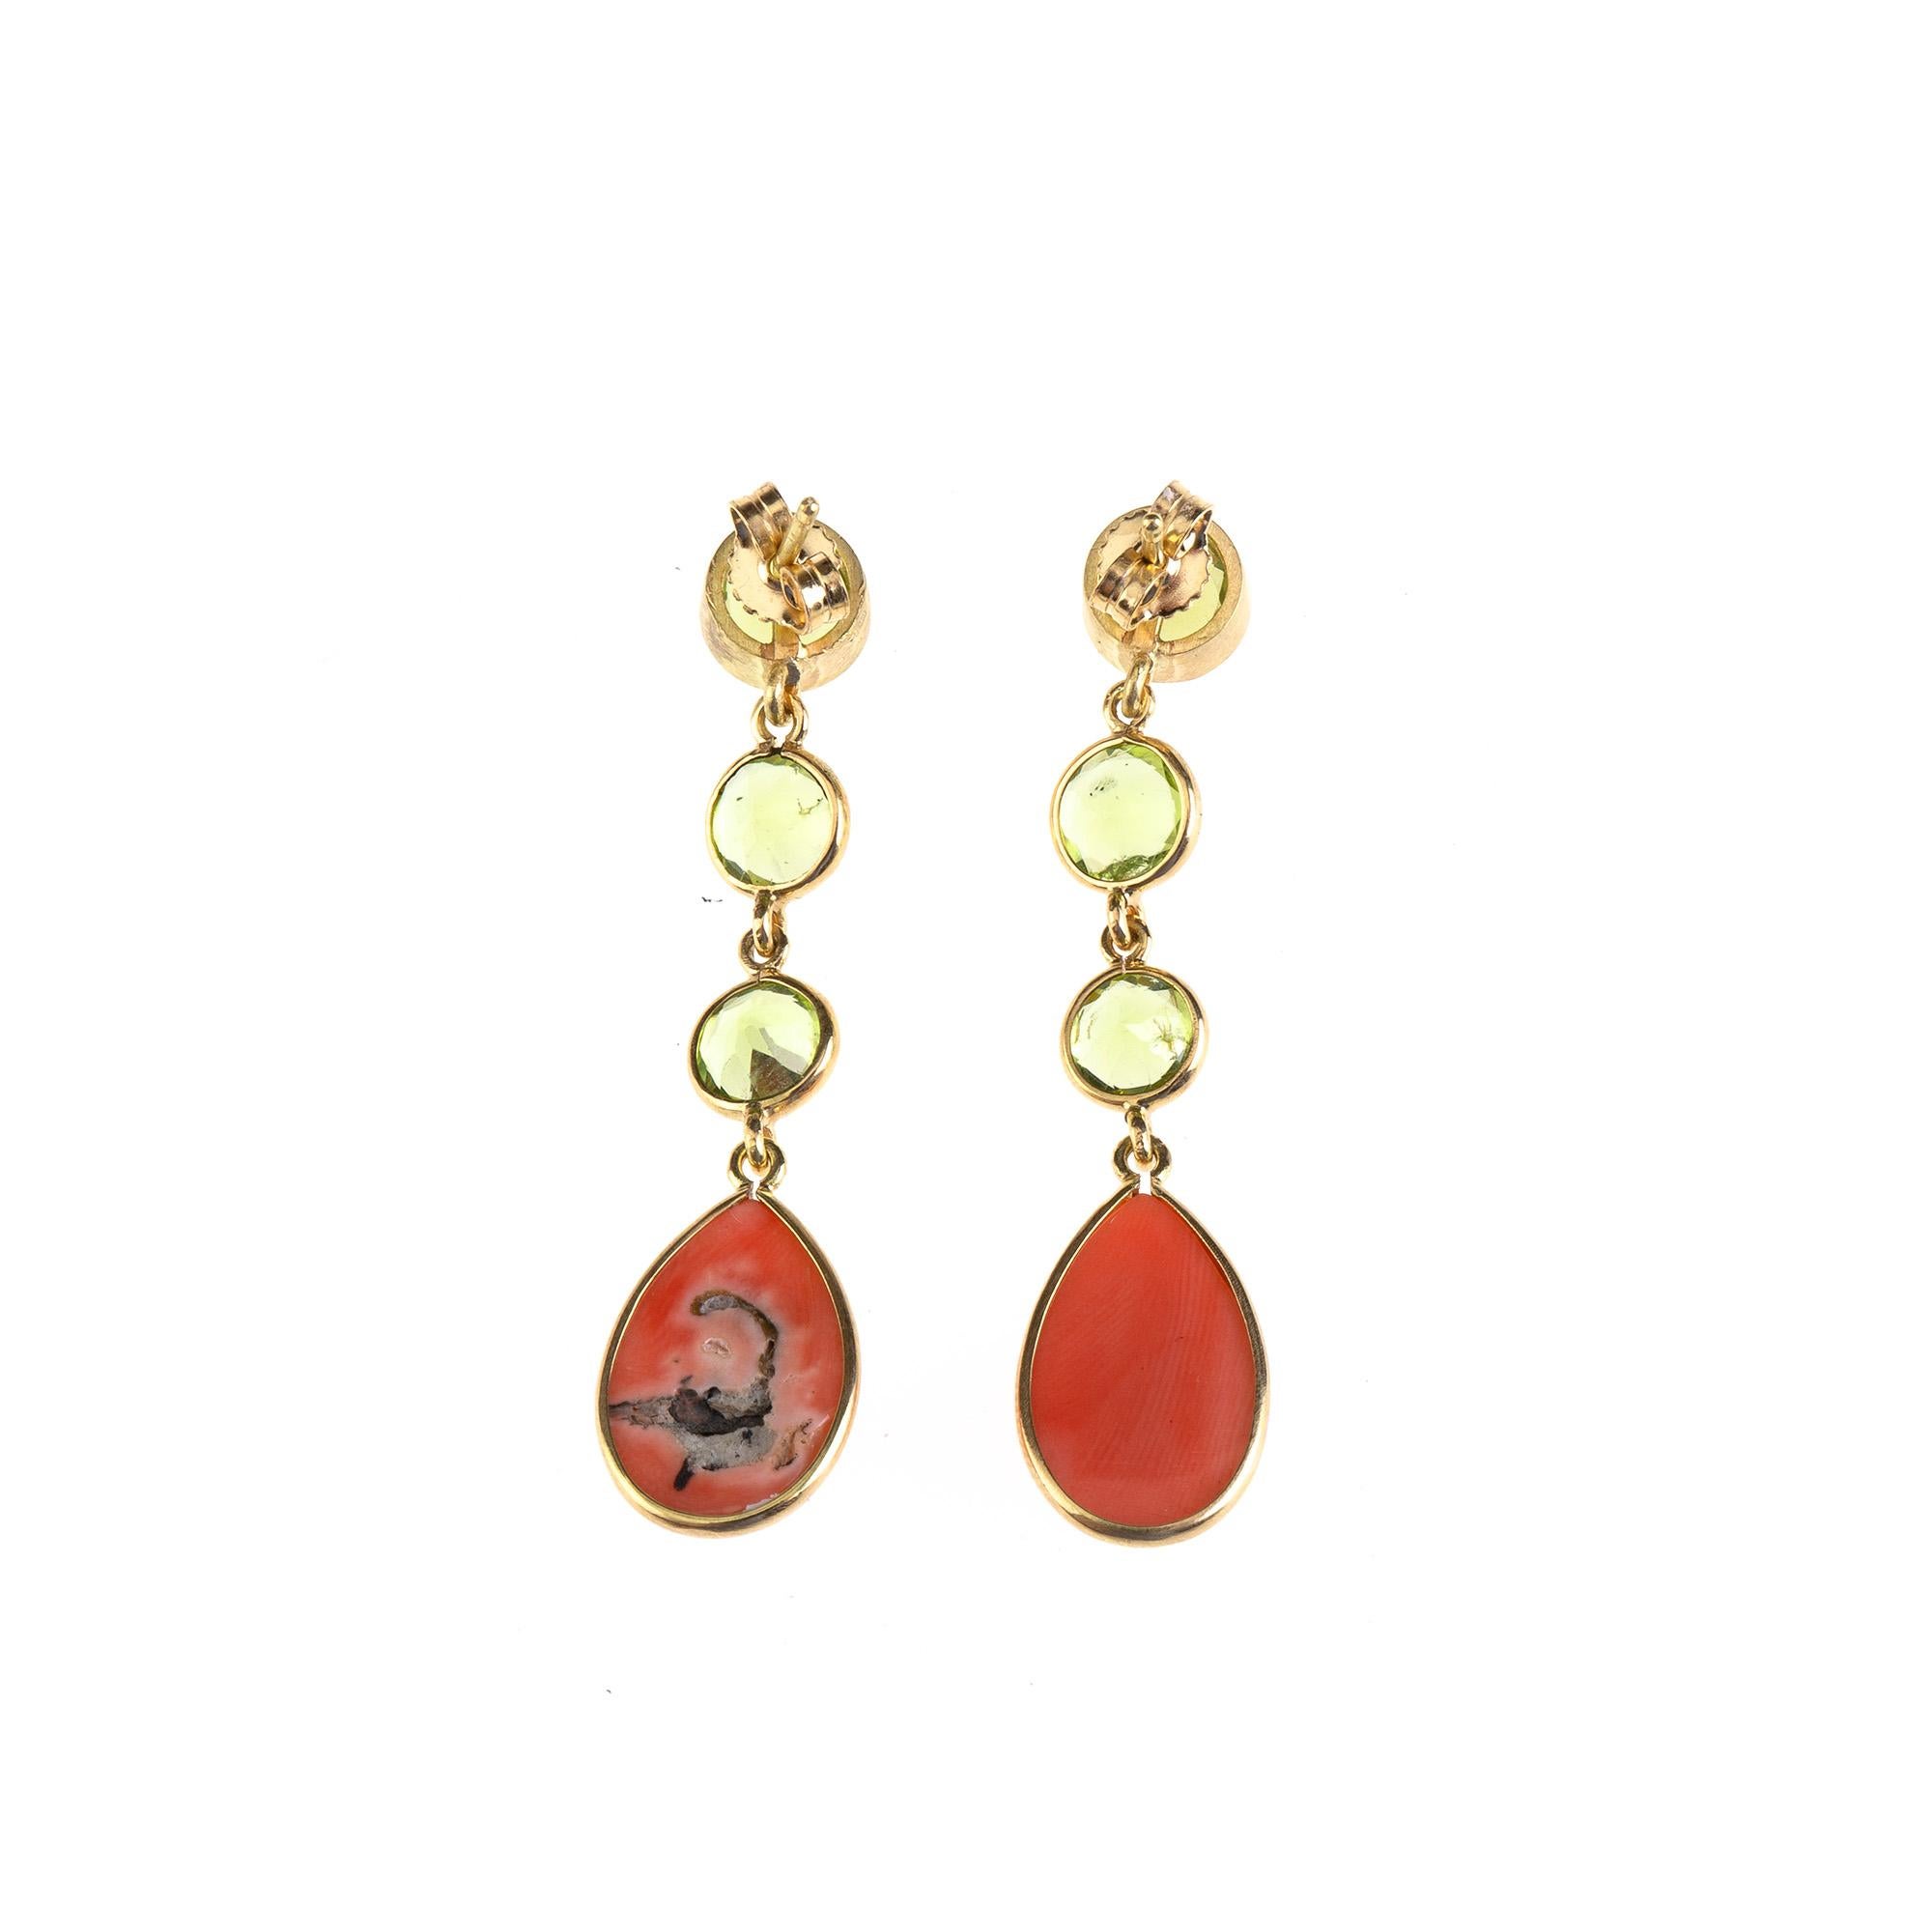 Carved sciatica coral,  peridot, 18 k Gold gr 7,80 earrings.
All Giulia Colussi jewelry is new and has never been previously owned or worn. Each item will arrive at your door beautifully gift wrapped in our boxes, put inside an elegant pouch or